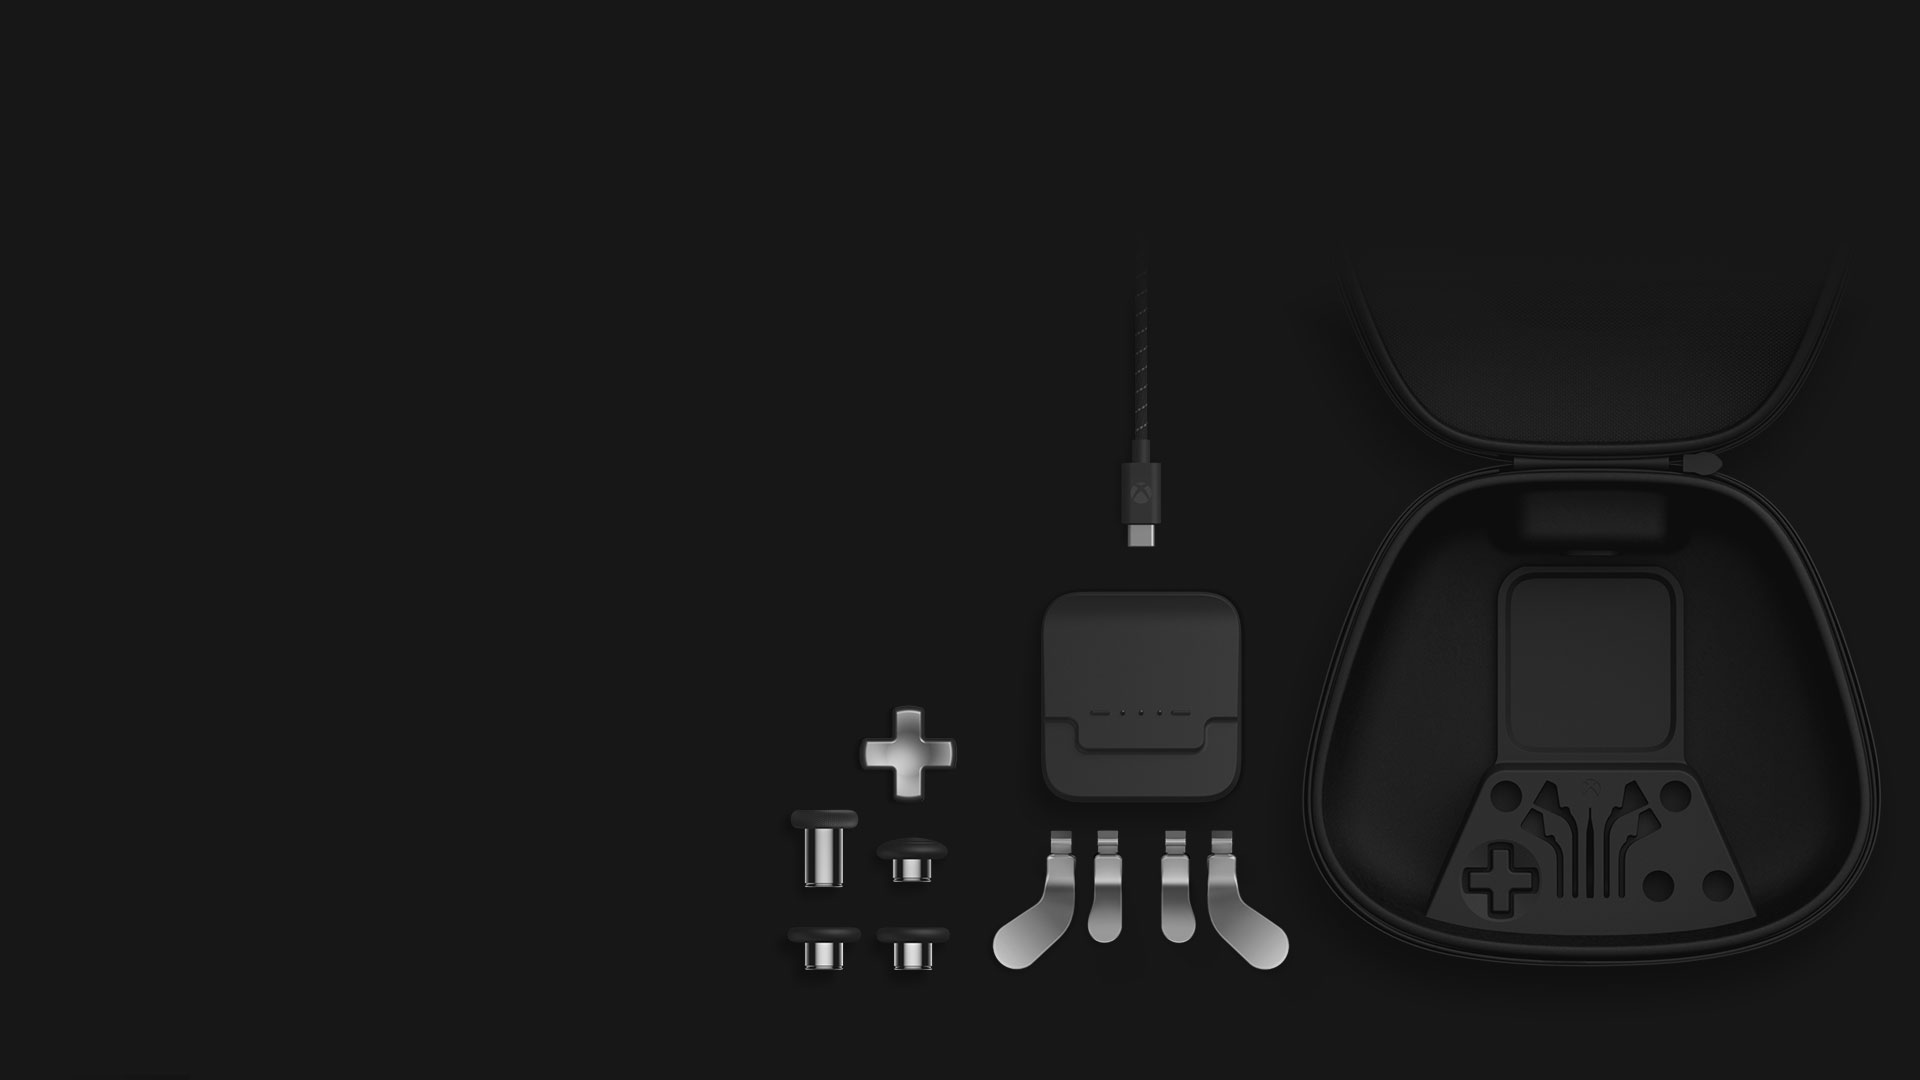 Complete Component Pack for Xbox Elite Wireless Controller Series